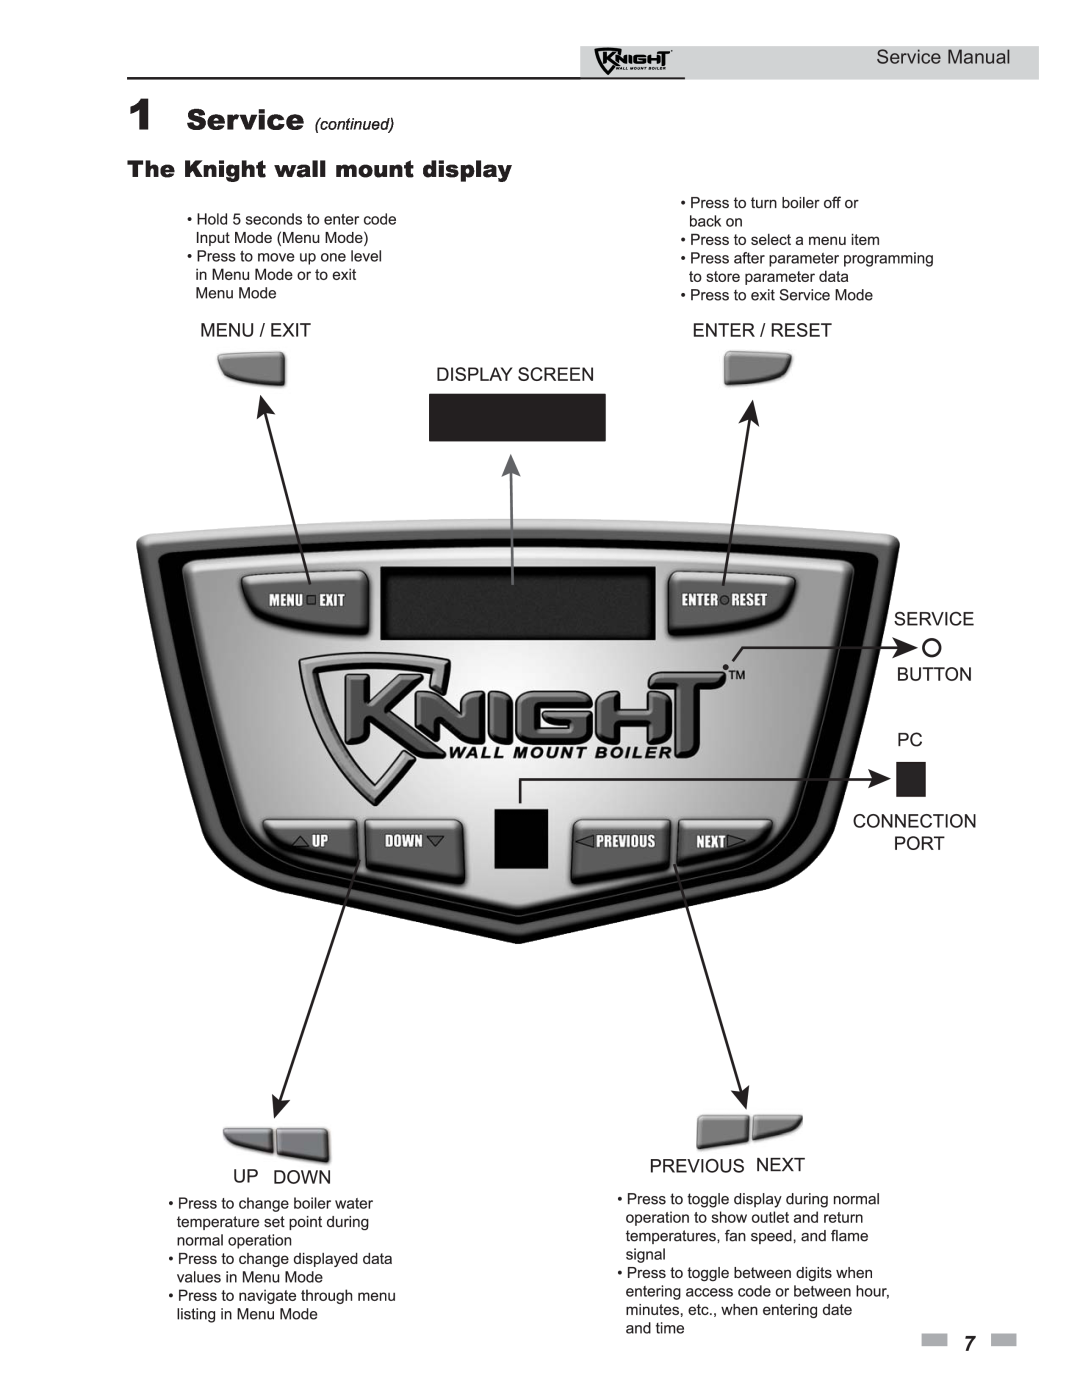 Lochinvar 50-210 service manual The Knight wall mount display, Service Manual, Service continued 